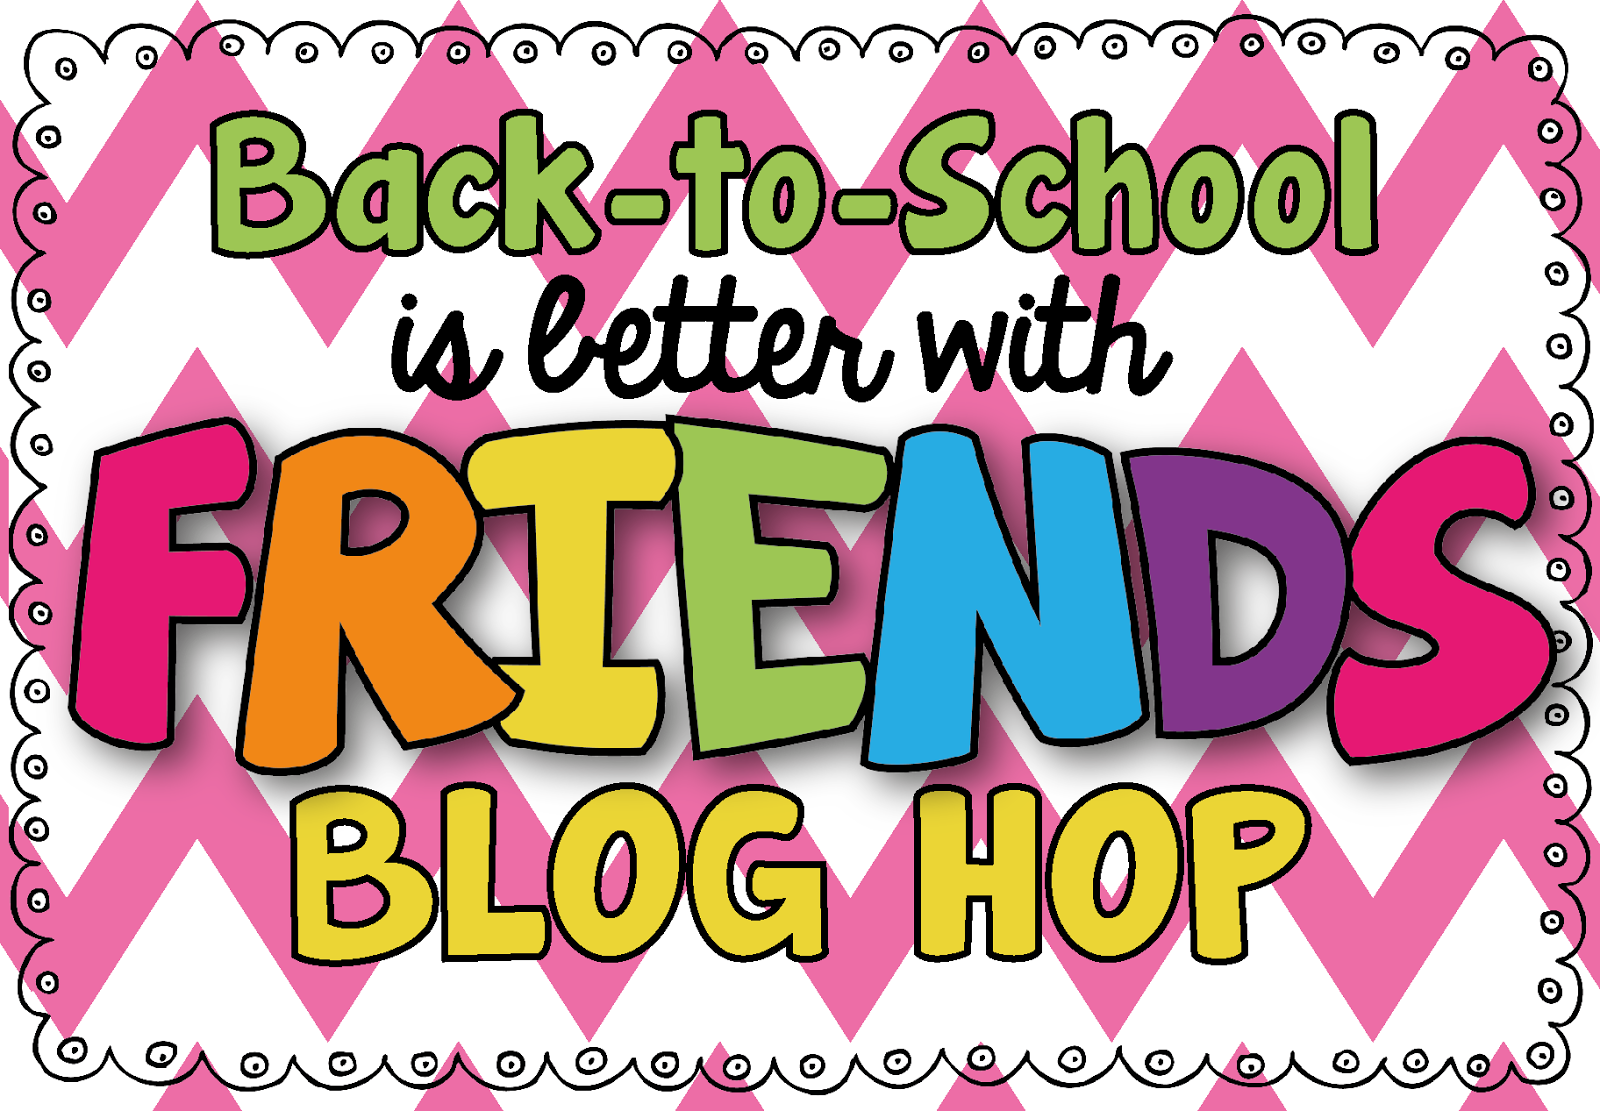 Mrs Poultney's Ponderings: Back to School With Friends blog hop